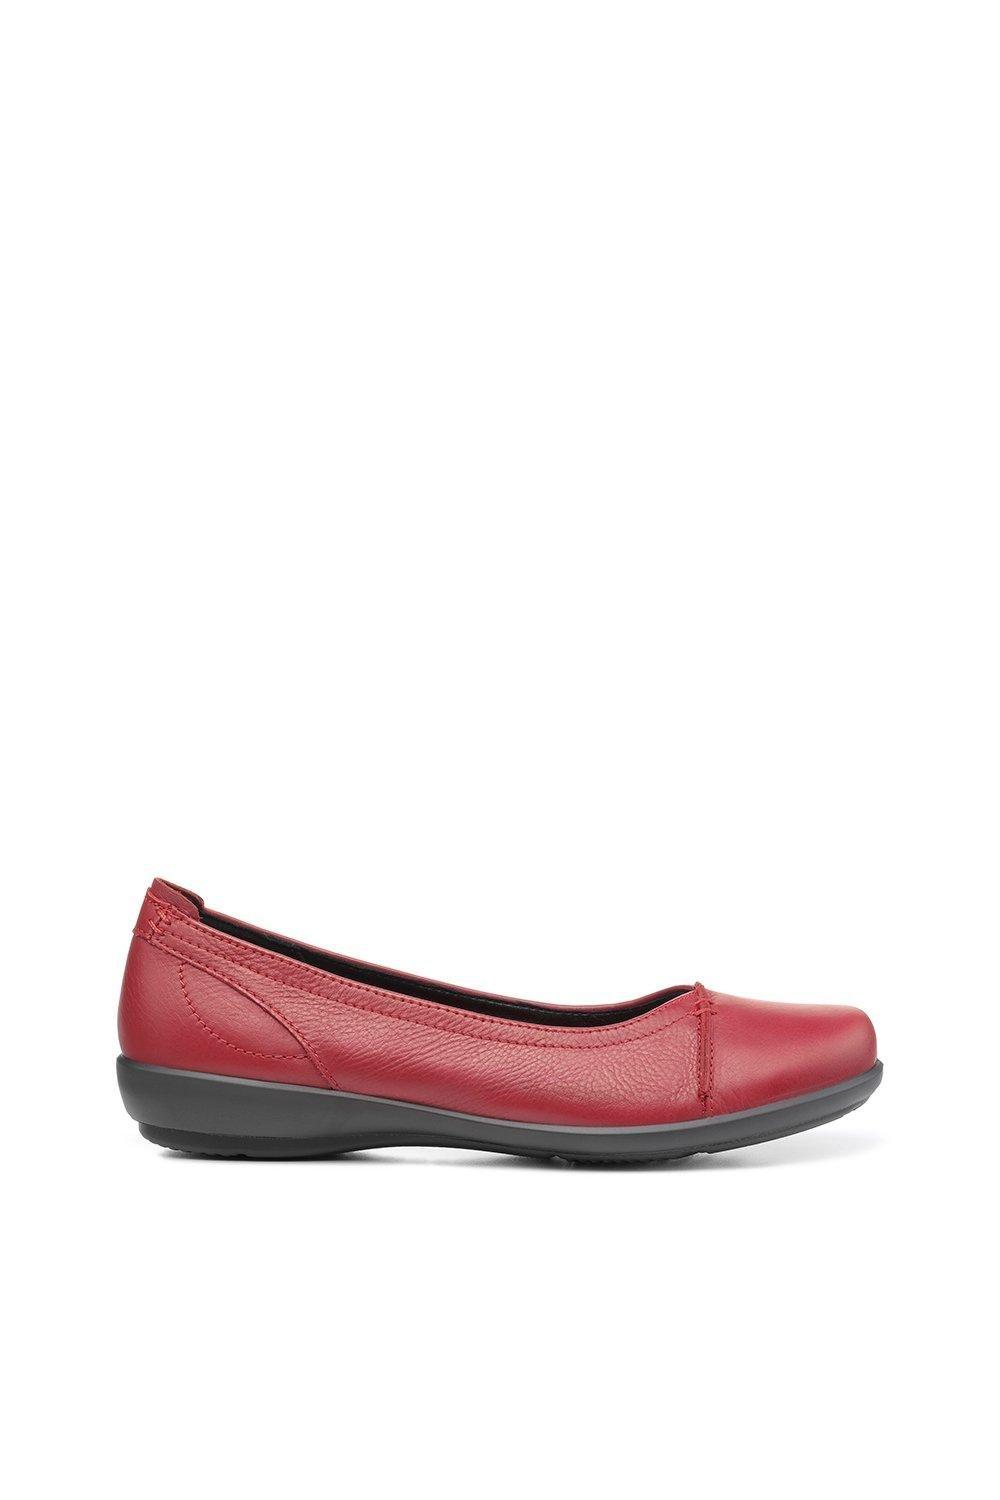 Hotter Women's 'Robyn II' Ballet Pumps|Size: 7|red